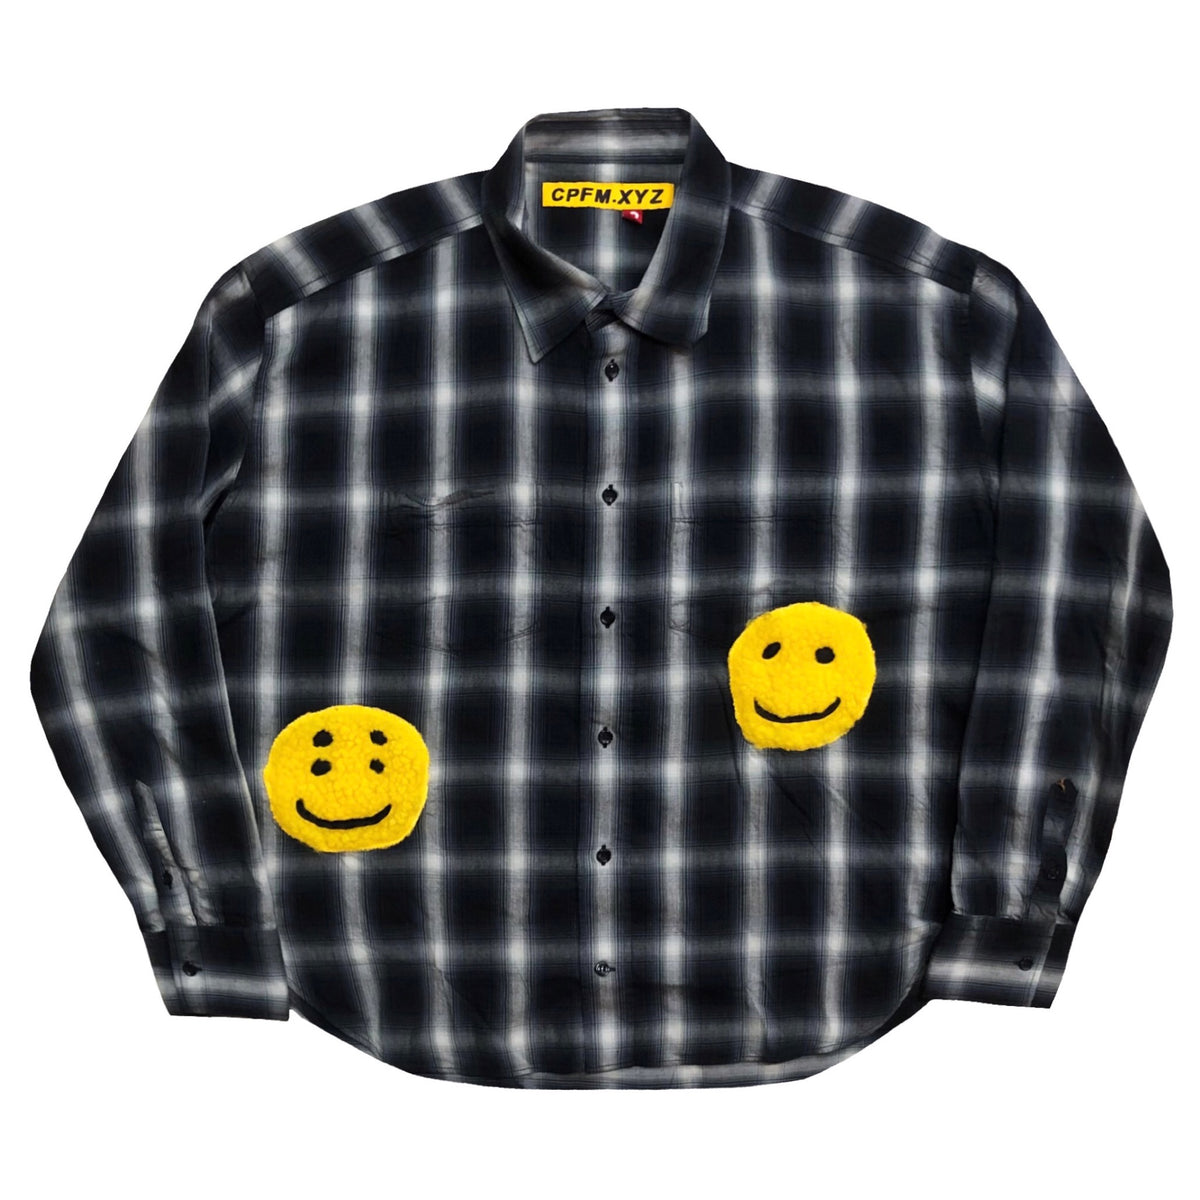 CPFM double vision check shirt Mサイズシャツ - www.hopesfulfilled.org